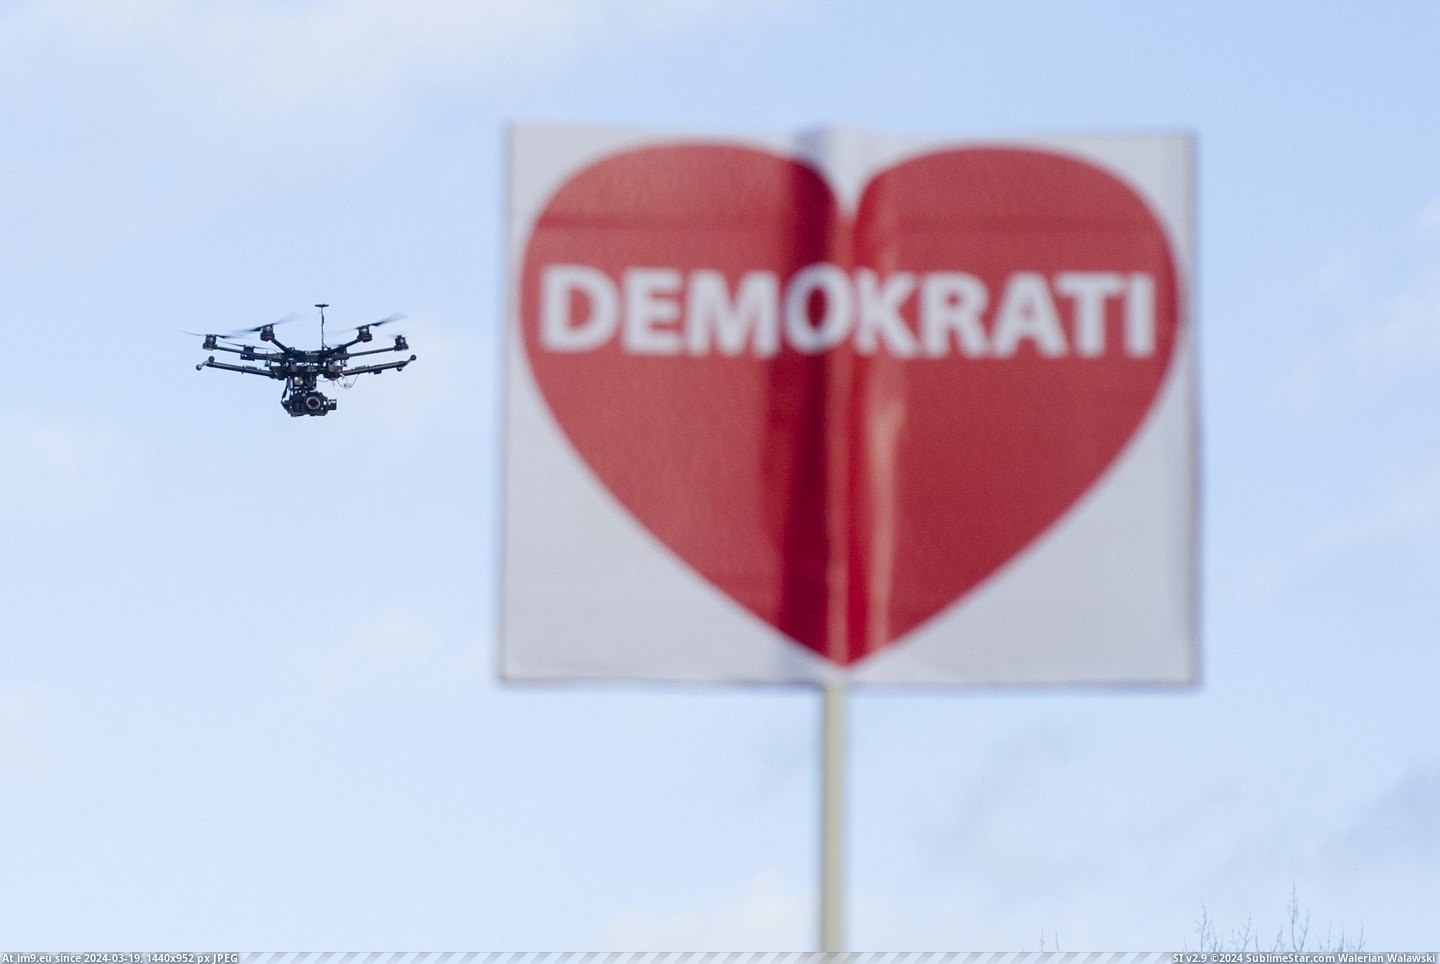 #Part #Good #Drone #Flew #Democracy #Got #Protest [Pics] A drone flew over a protest I took part in today. Got quite a good pic (democracy) Pic. (Изображение из альбом My r/PICS favs))